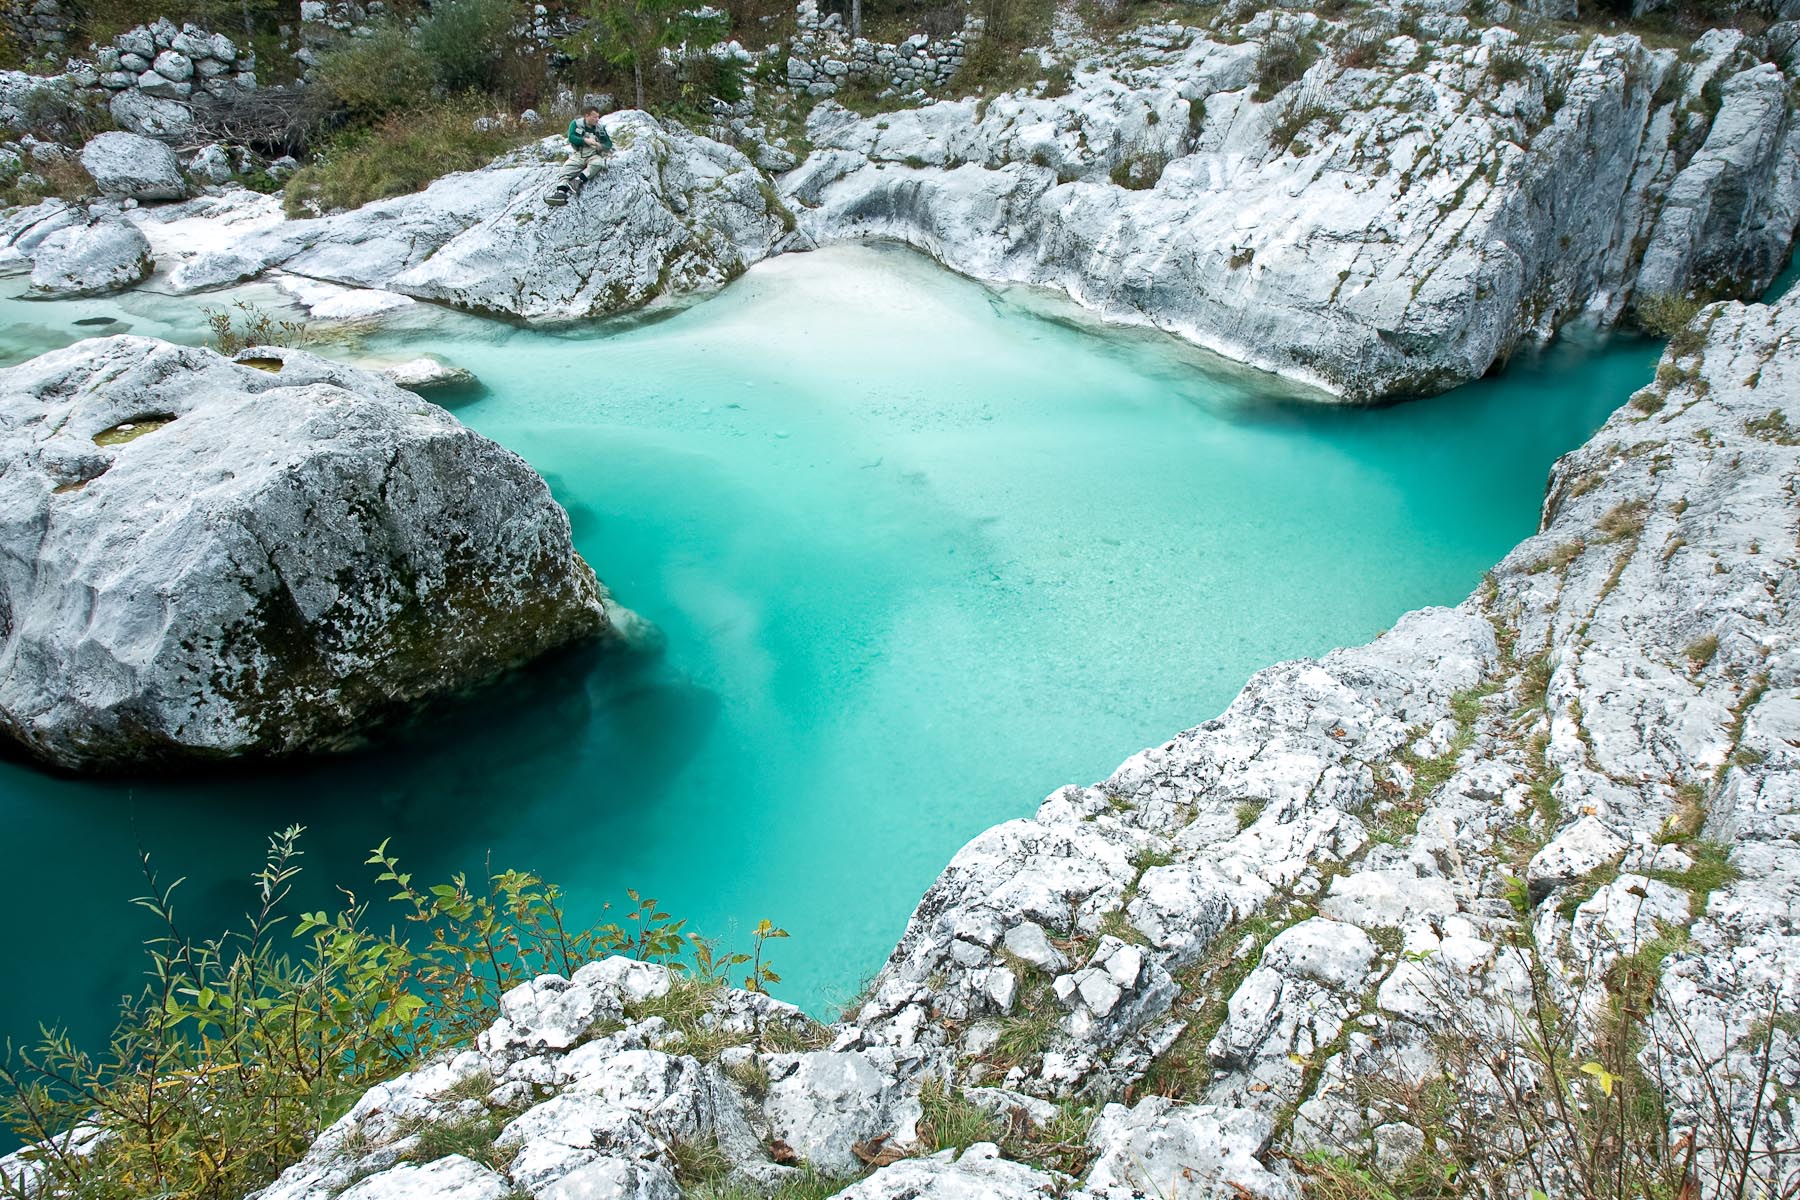 Thousands of fishermen flock to Soca River basin to try and catch the illusive and famous Marble trout, known to grow over 120cm and weigh over 25kg. Fishing regulation in Slovenia is strict, permits are very expensive, and size and quantity limits of a Marble trout catch are very low. All in the name of preserving the species.